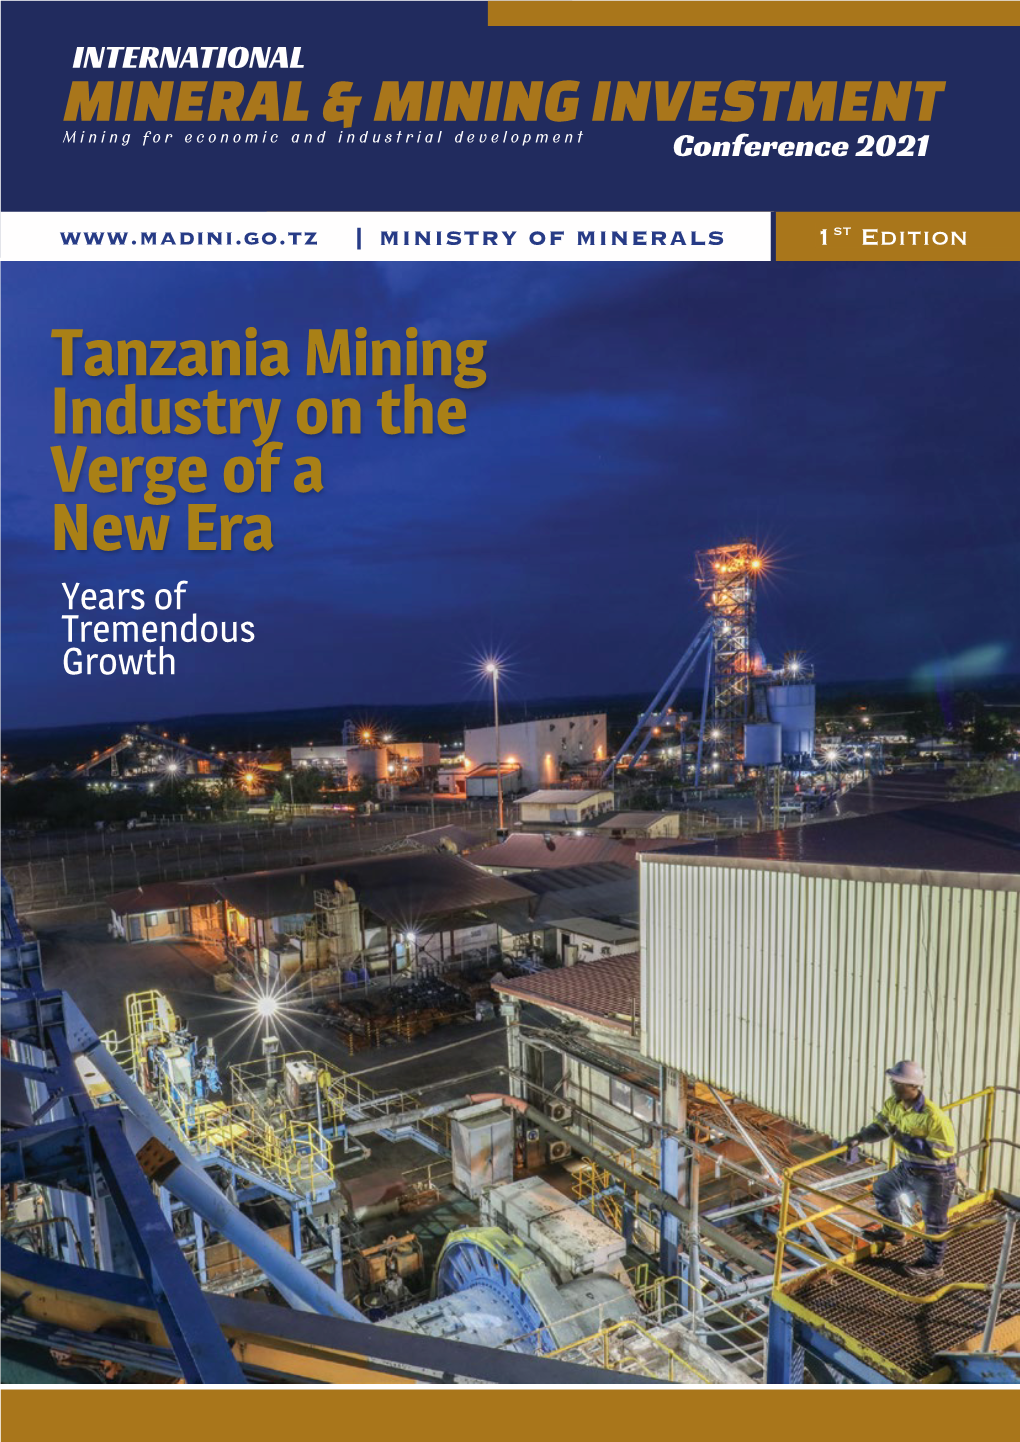 Tanzania Mining Industry on the Verge of a New Era Years of Tremendous Growth THEME: “Mining Sector for Stable Economy and Sustainable Development”